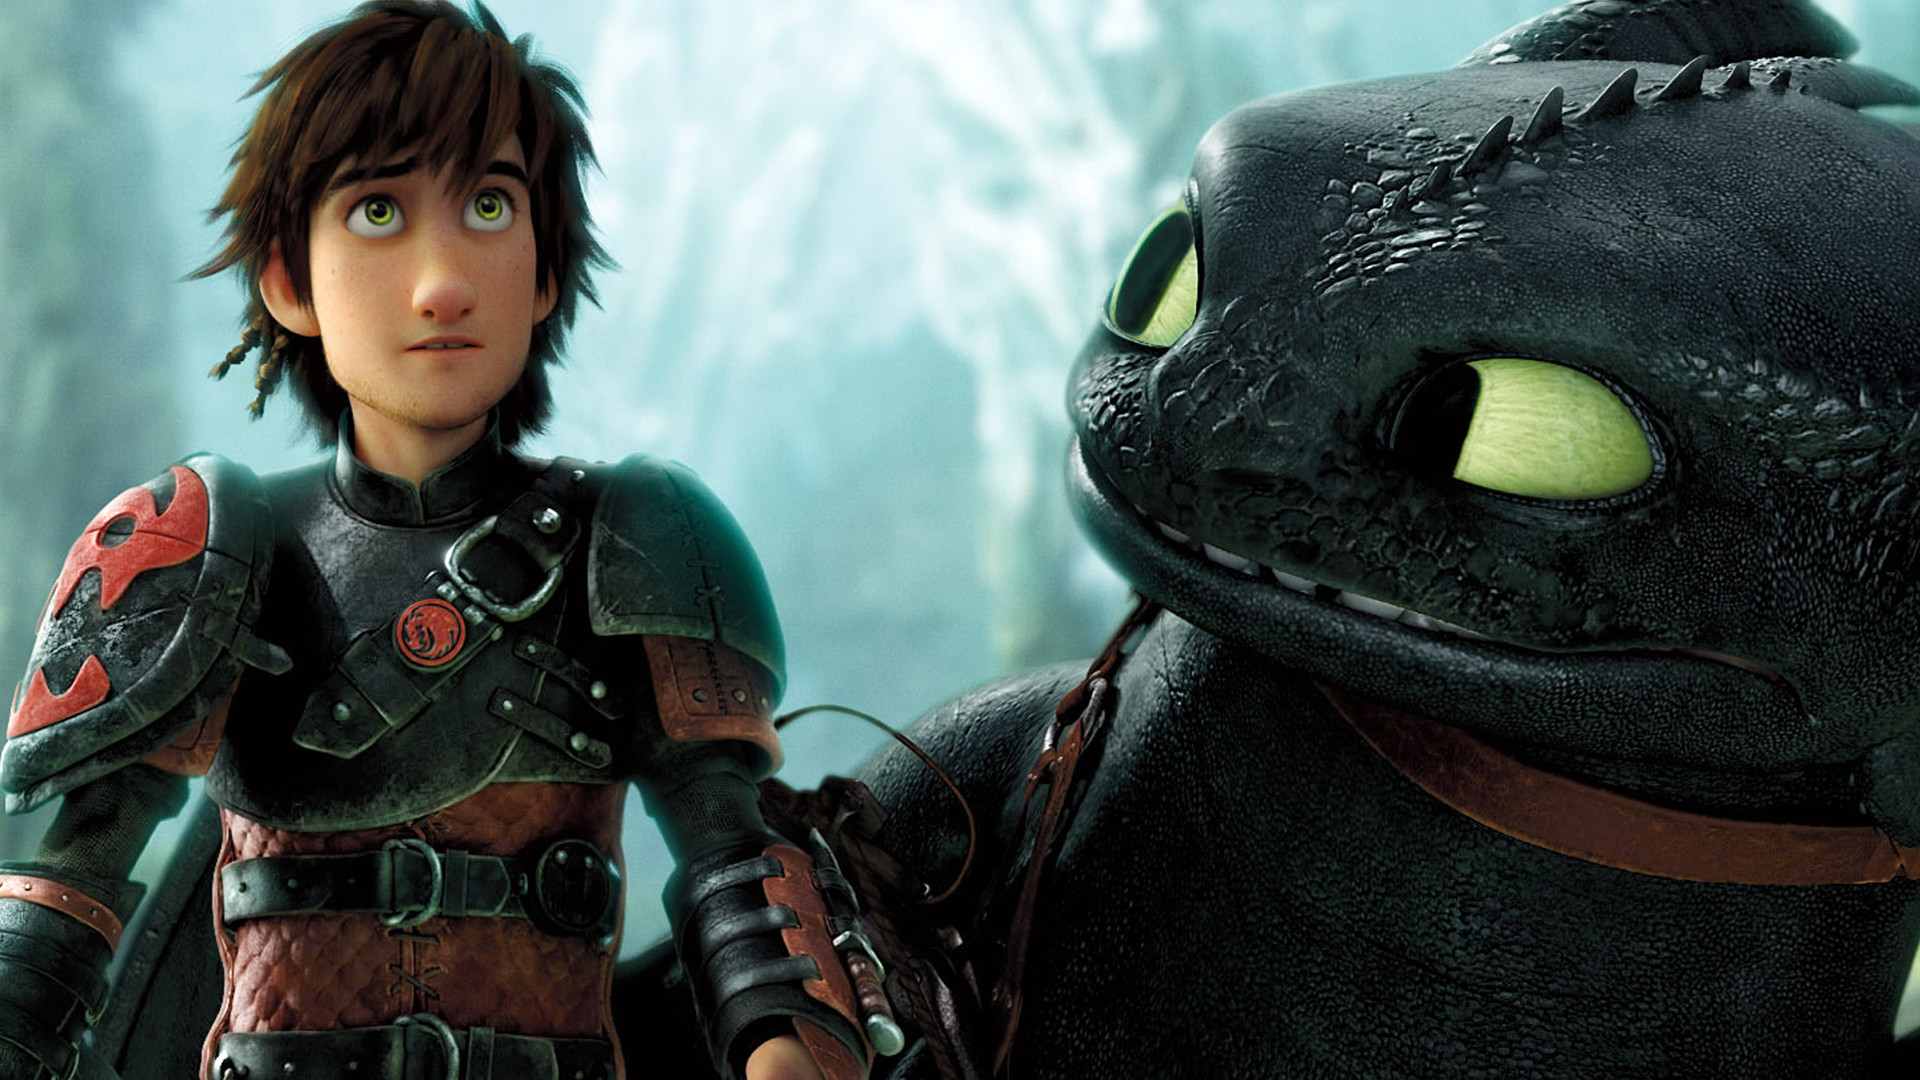 How To Train Your Dragon 2 Hiccup Sword 1920x1080